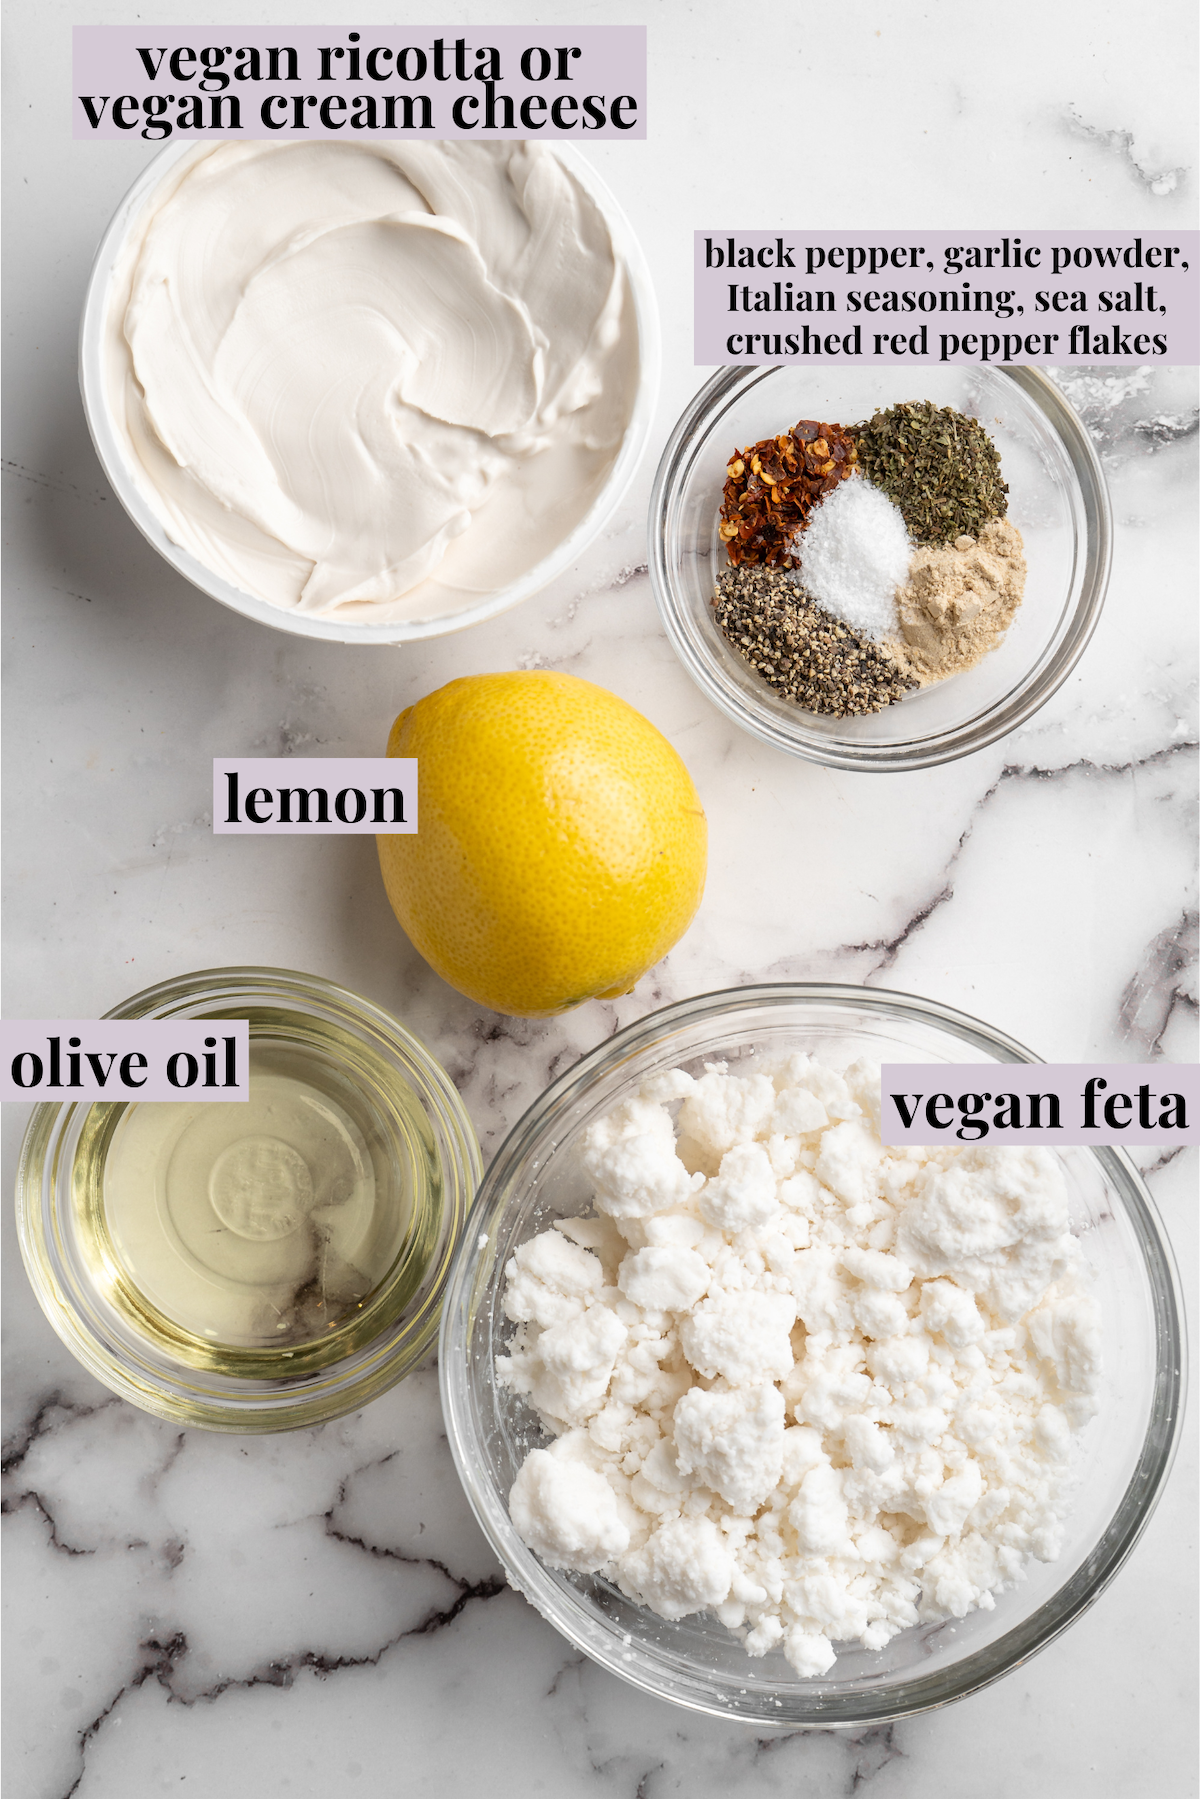 Overhead view of ingredients for vegan whipped feta with labels